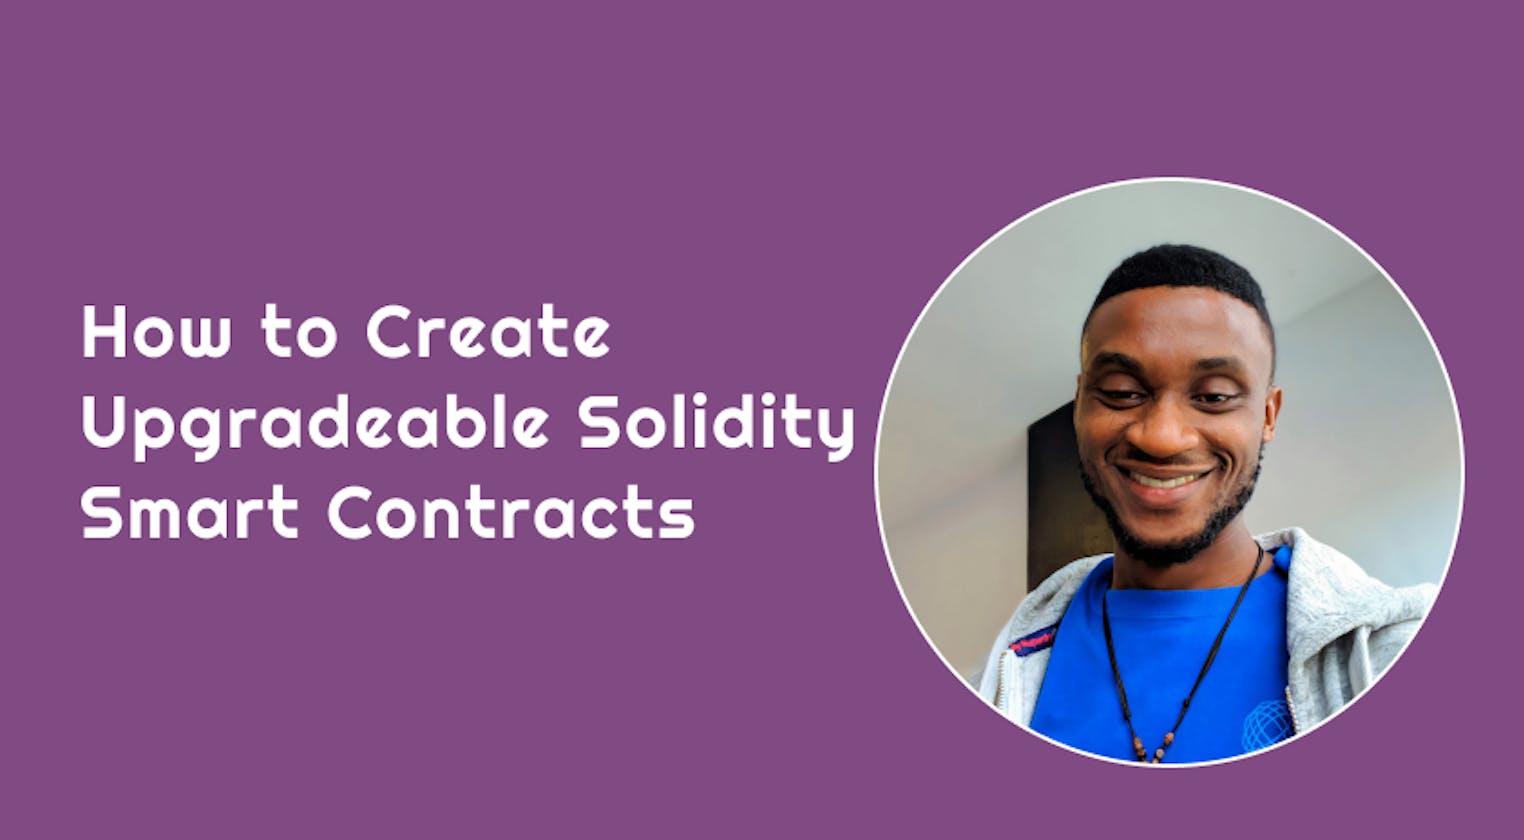 How to Create Upgradeable Solidity Smart Contracts